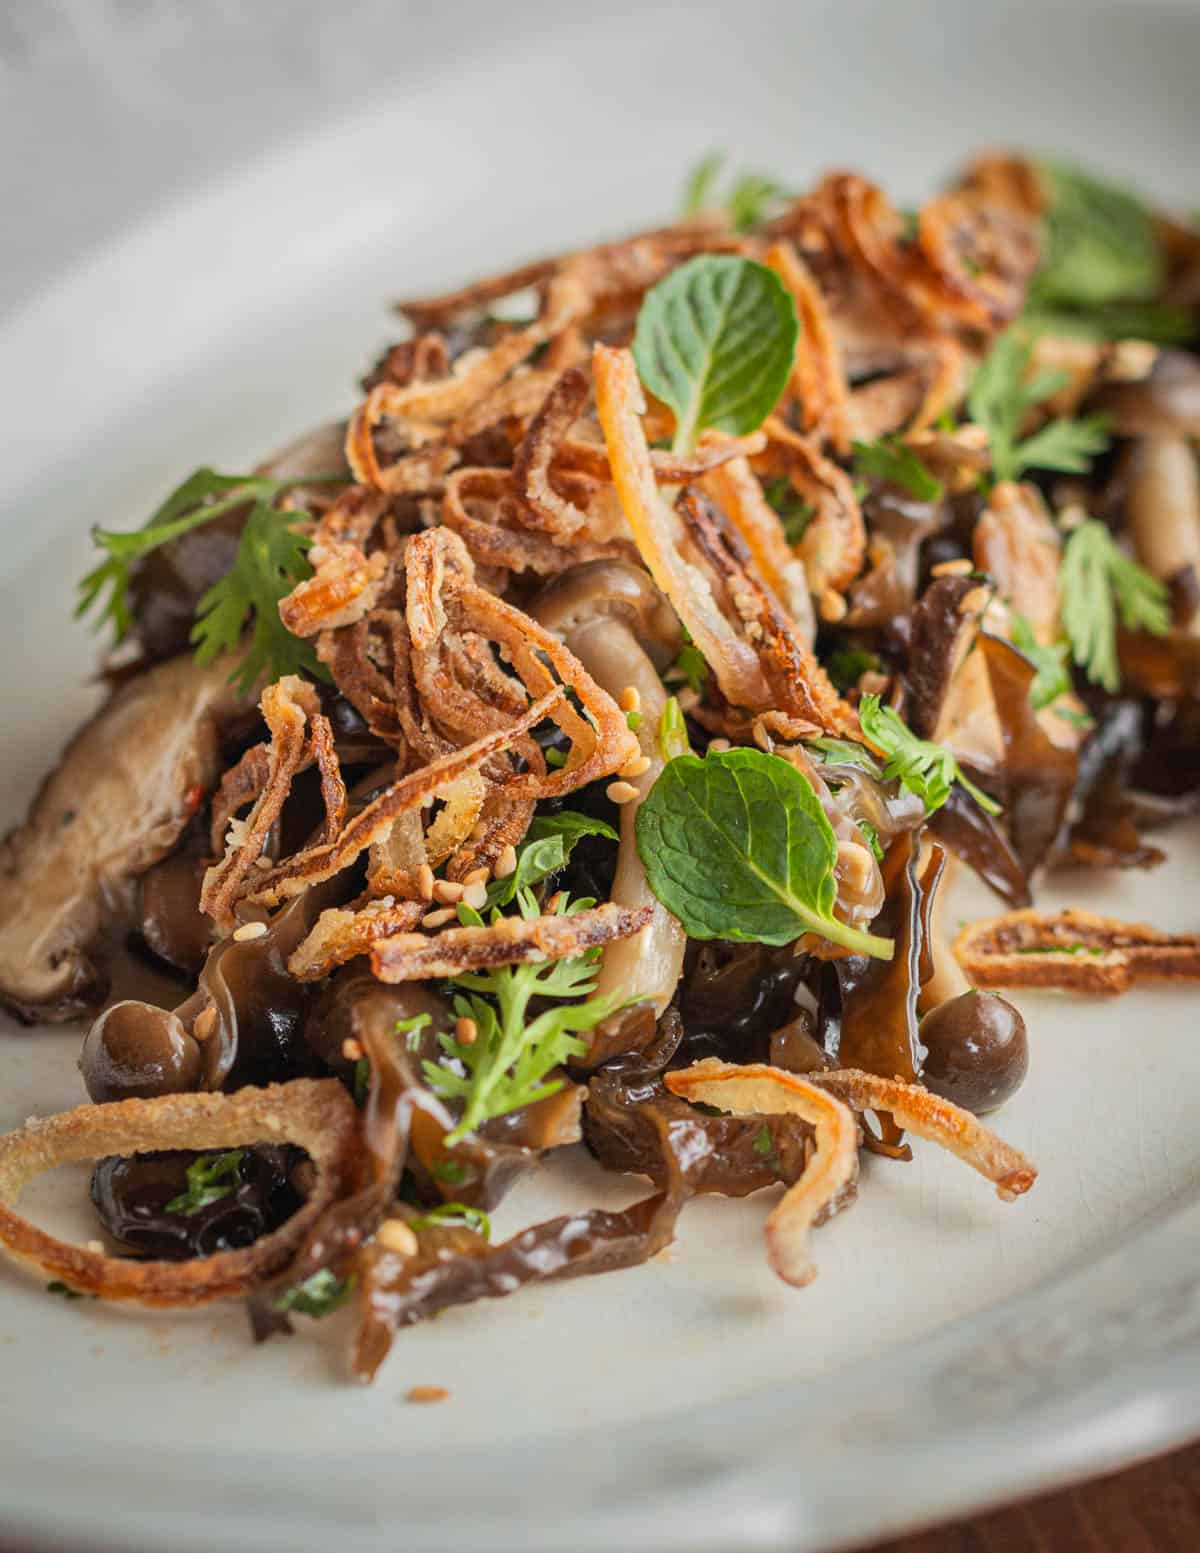 Cool or room temperature salads are a great way to enjoy the chewy mushroom texture.